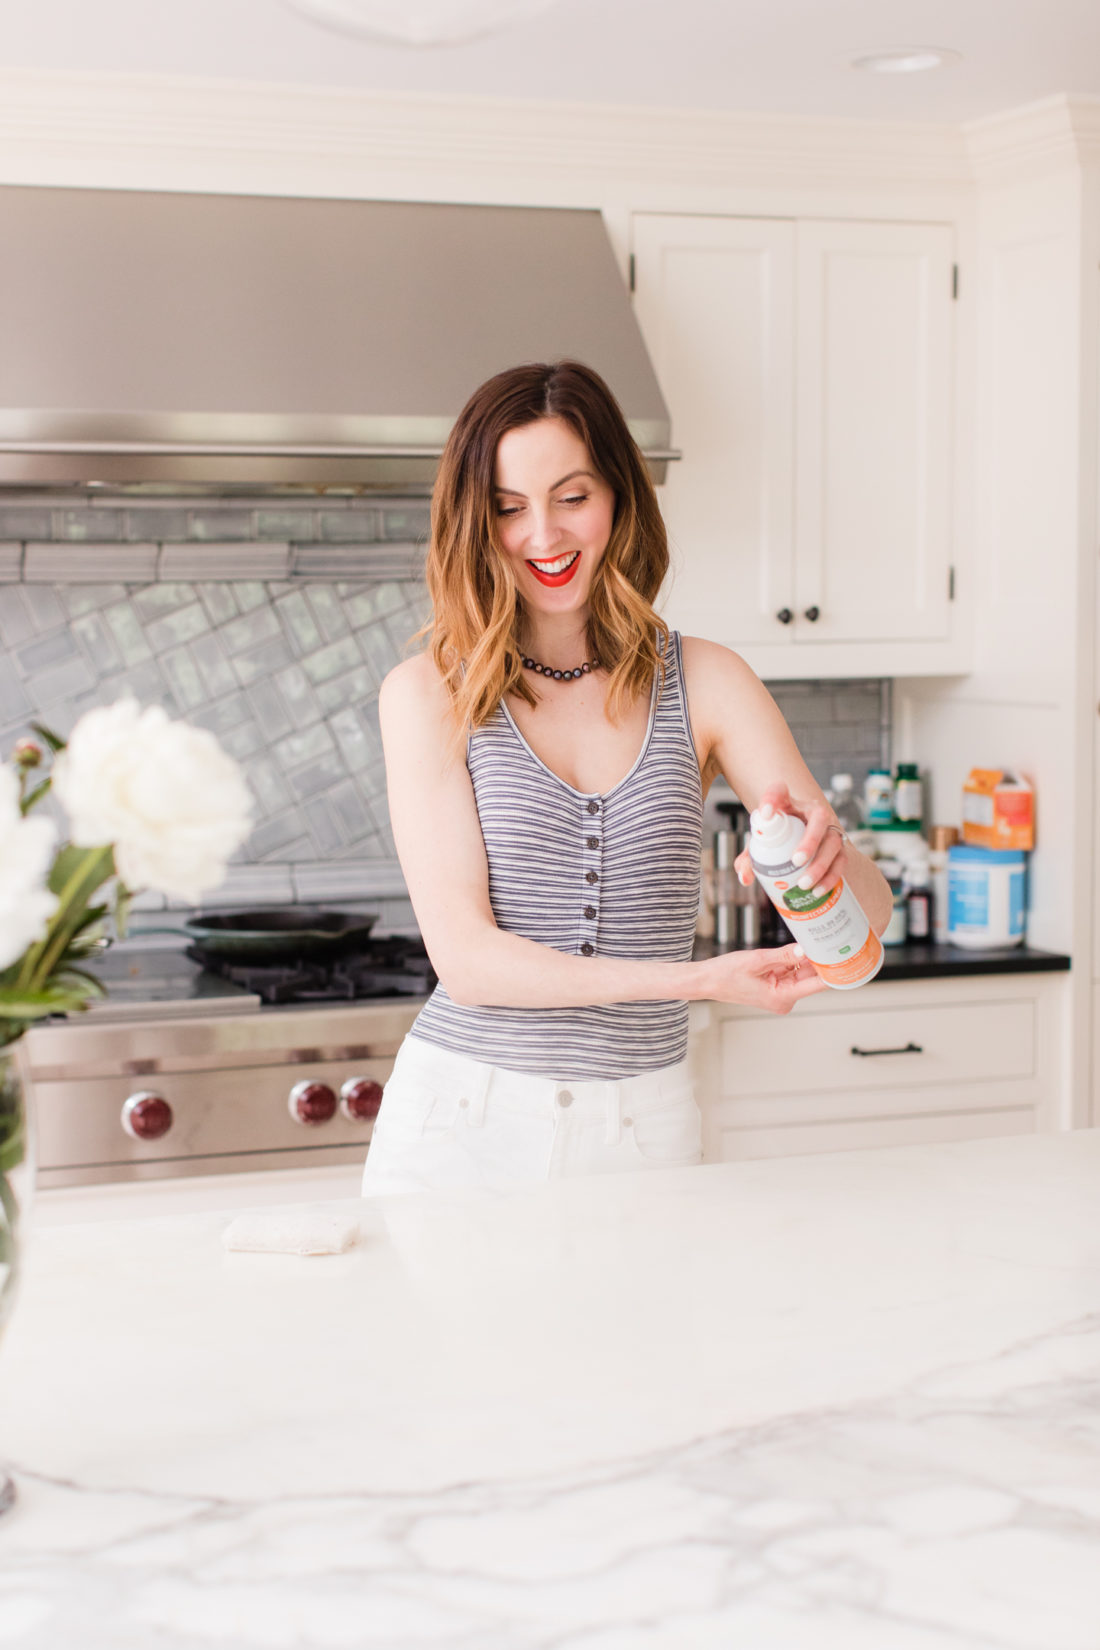 Eva Amurri Martino sprays the countertops with Seventh Generation disinfecting spray in the kitchen of her connecticut home